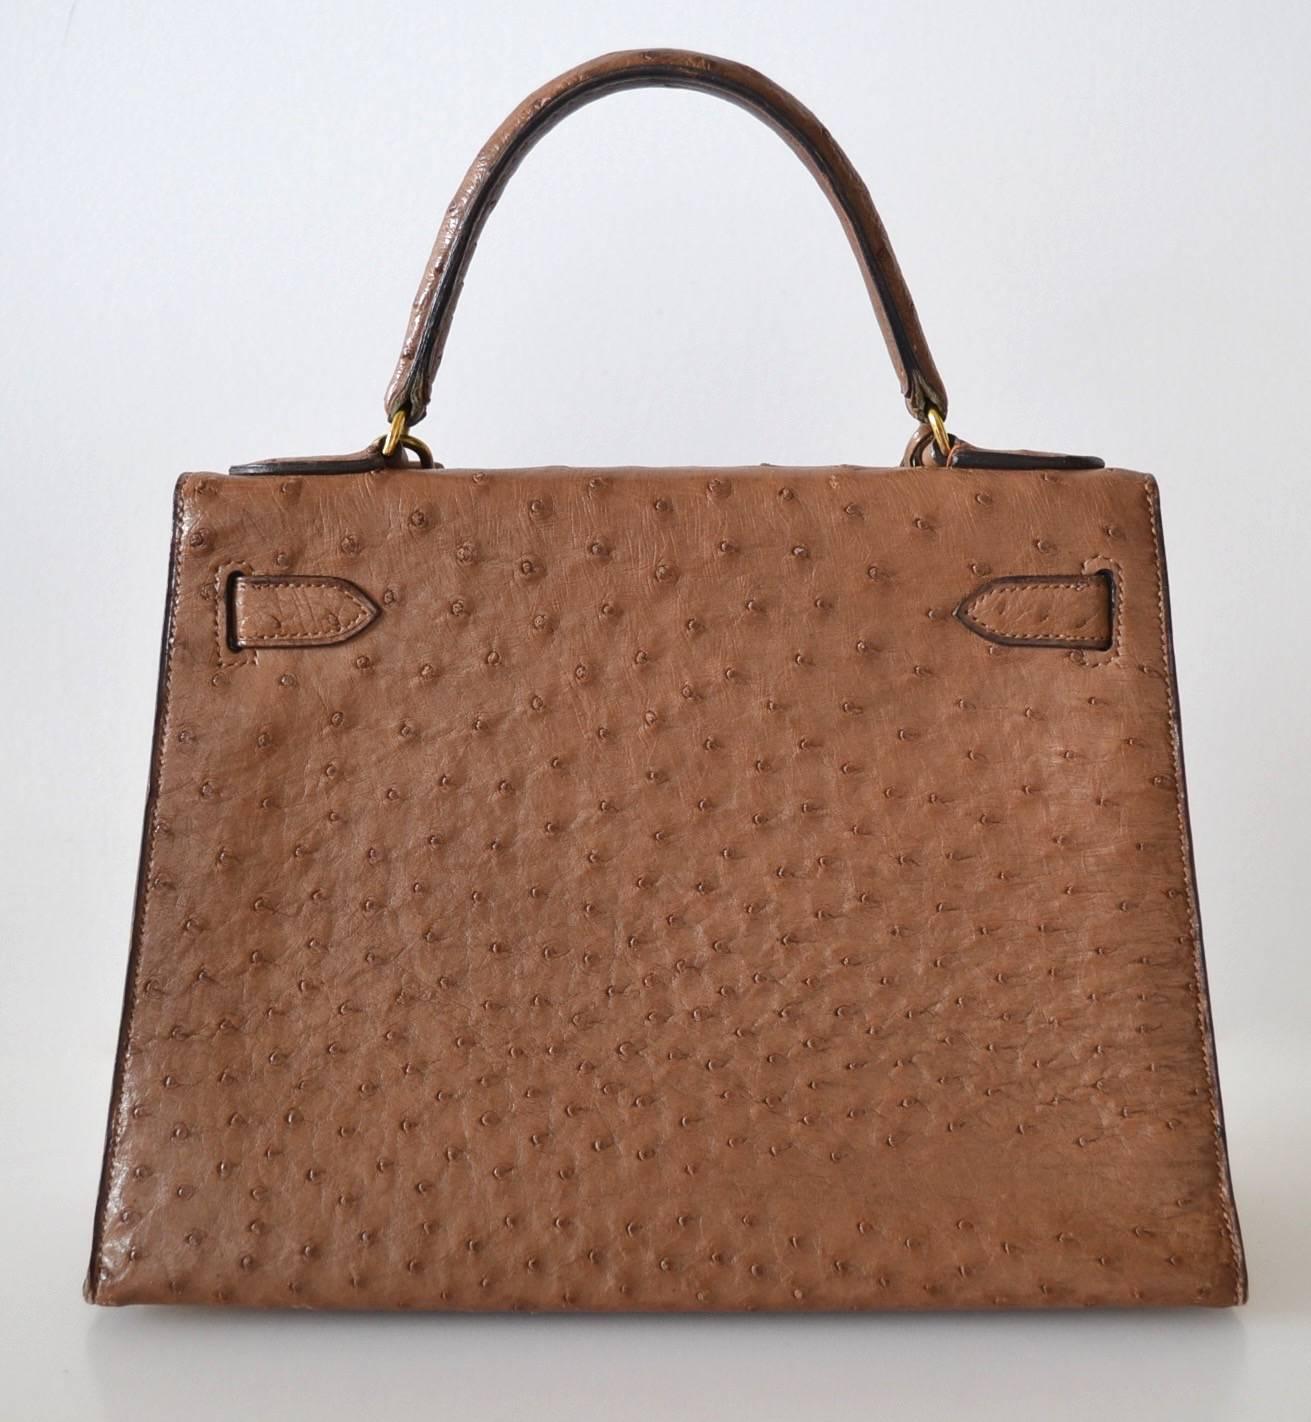 Hermès Kelly 28 Autruche Terre
 
Vintage condition – 7/10
 
Ostrich skin
Terre color
Gold hardware
No stamp visible – Around 70s
 
Handle is in good condition
Corners are in good condition (no holes)
Interior is clean – Chevre goat